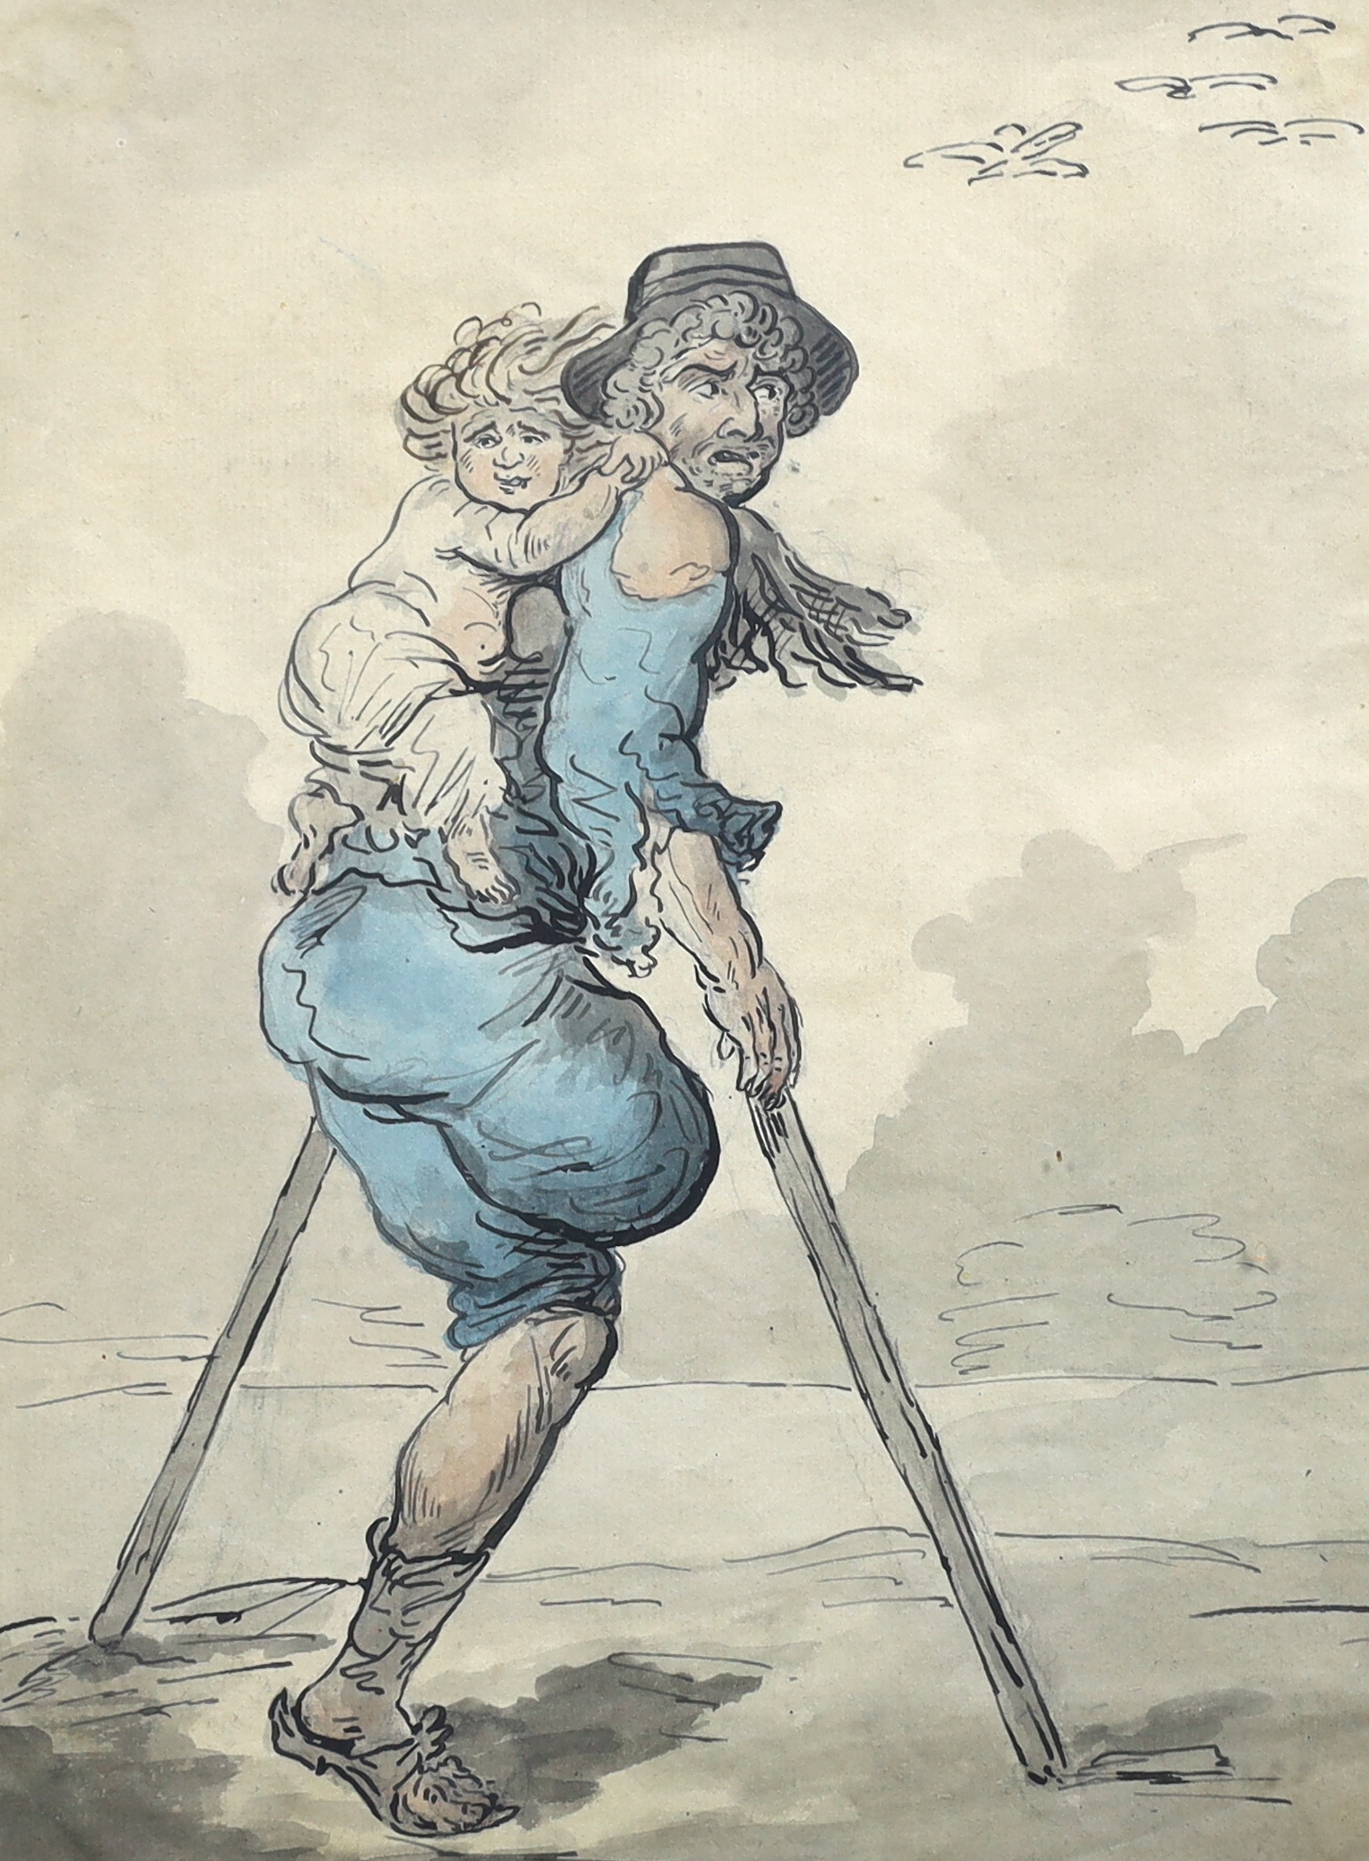 Thomas Rowlandson (British, 1756-1827), A cripple and child, ink and watercolour on paper, 28 x 21cm